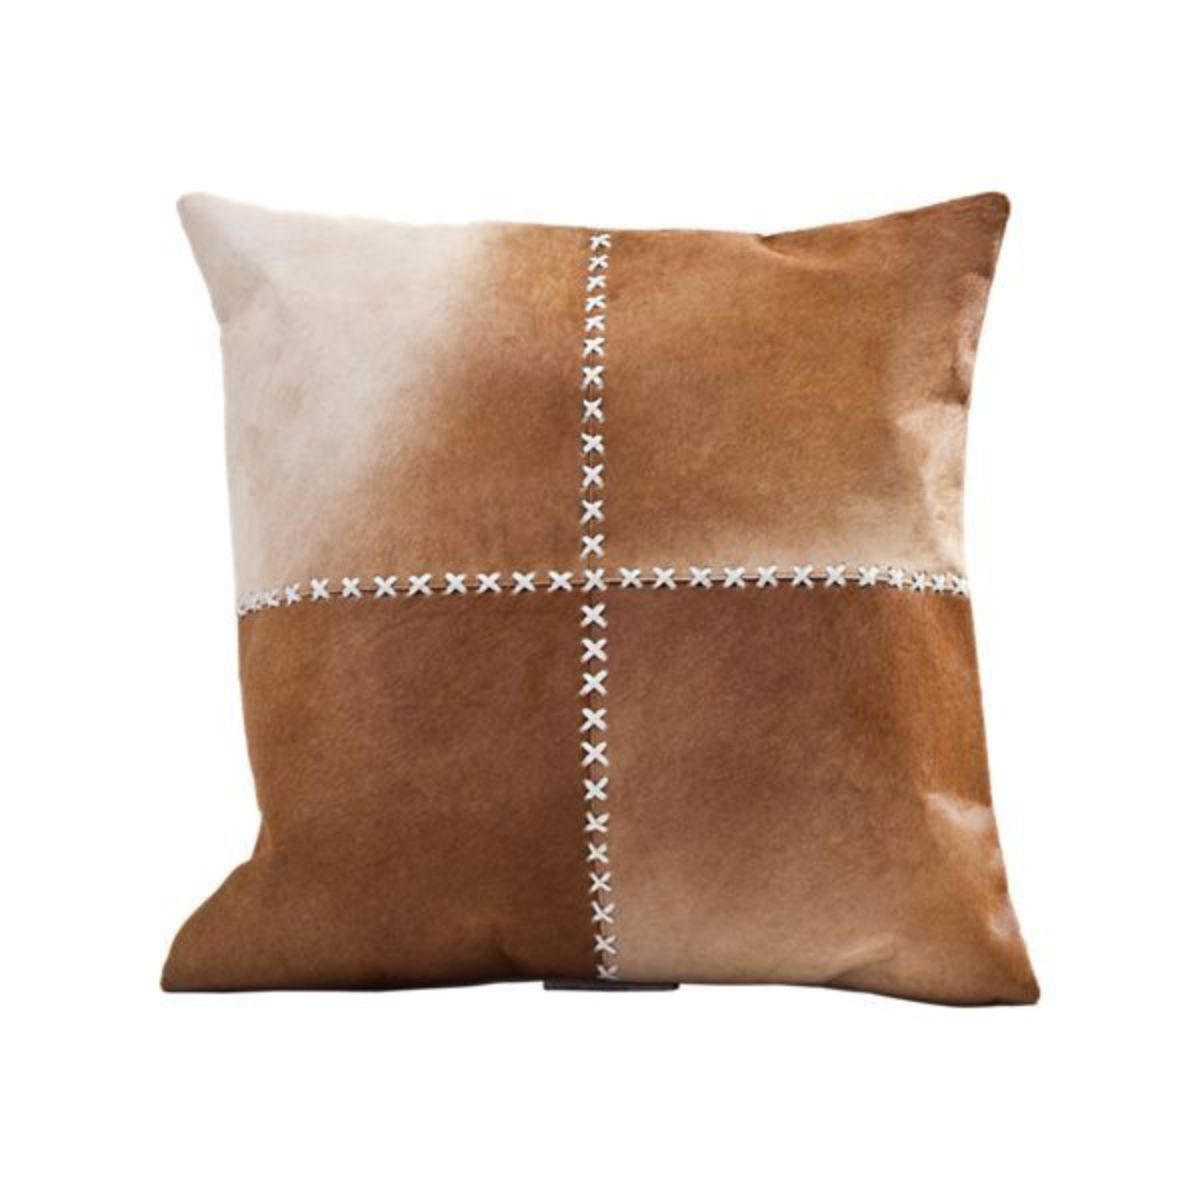 Natural Cowhide Tan Square Pillow with Cross Stitch Detail